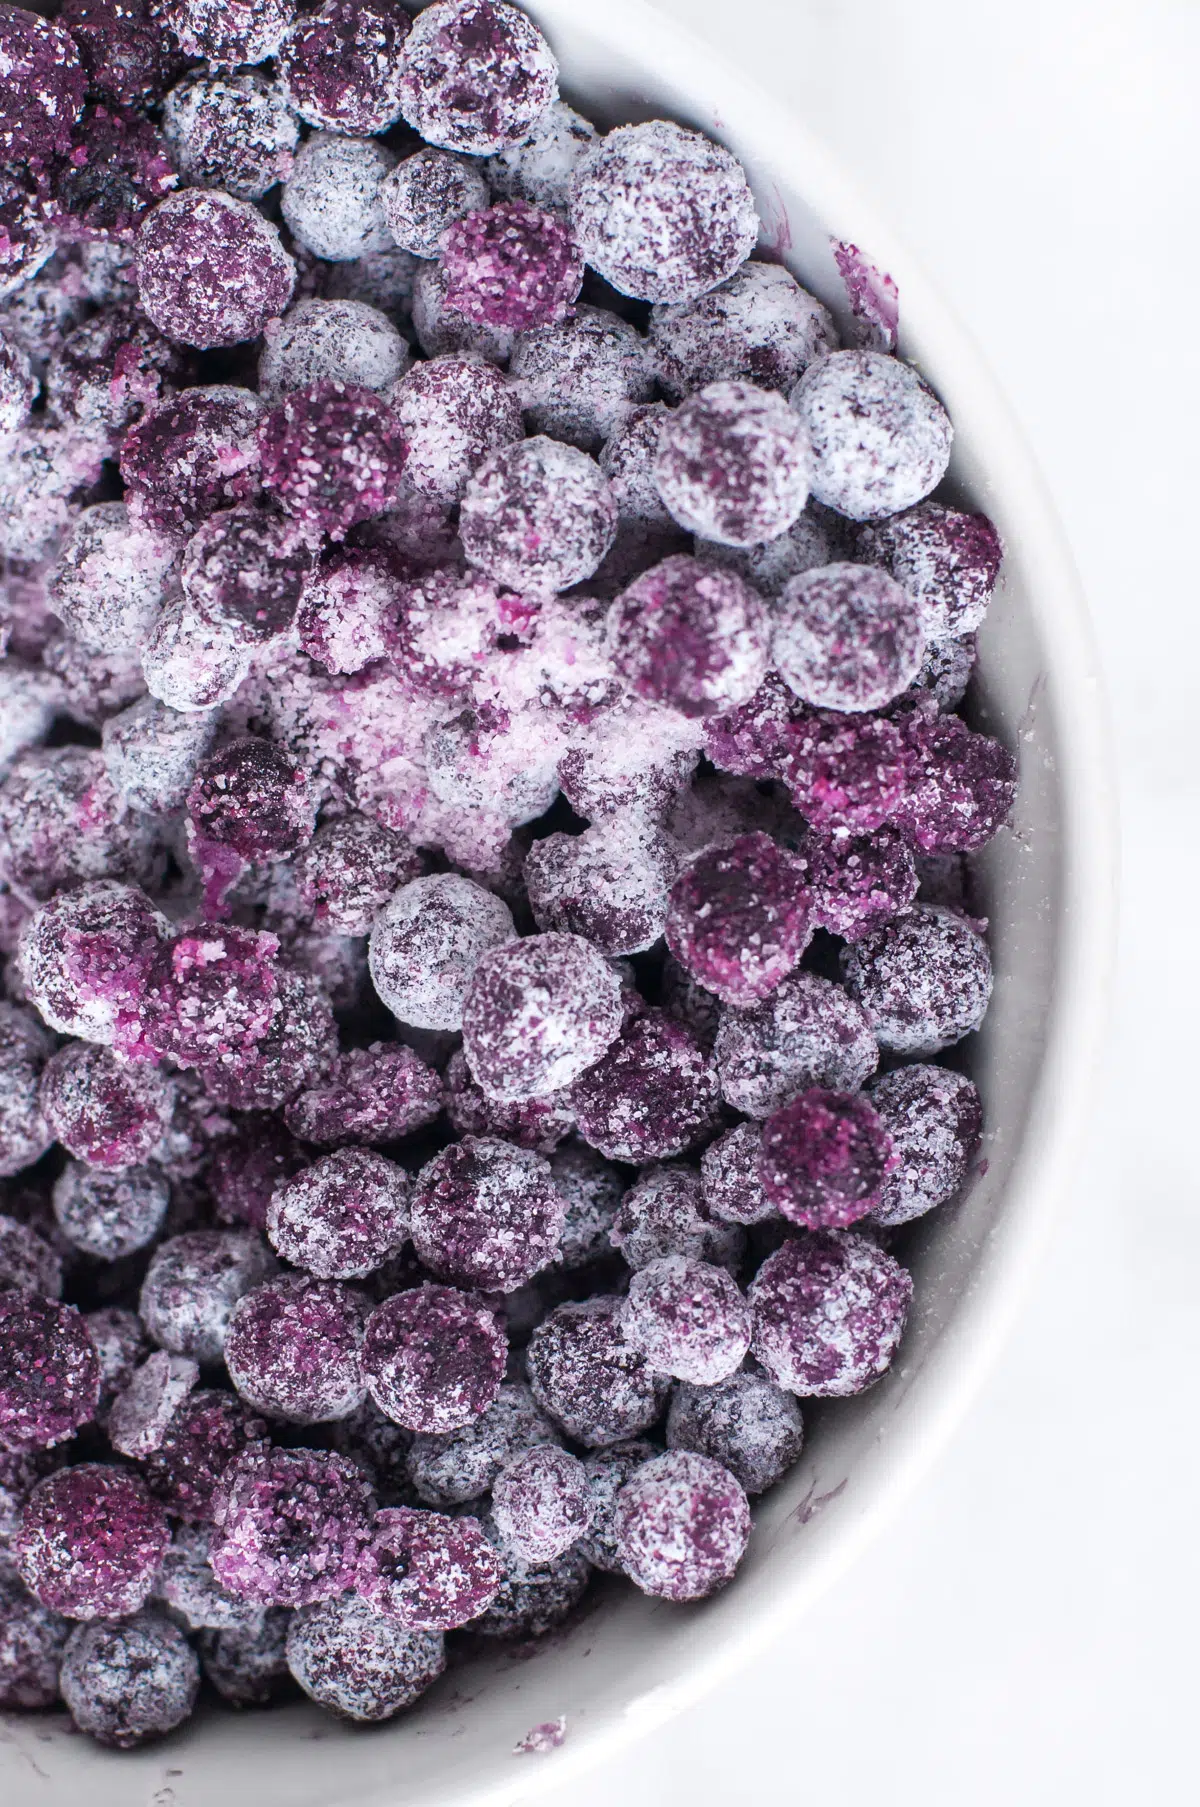 Blueberries covered with sugar and cornstarch in a white bowl.